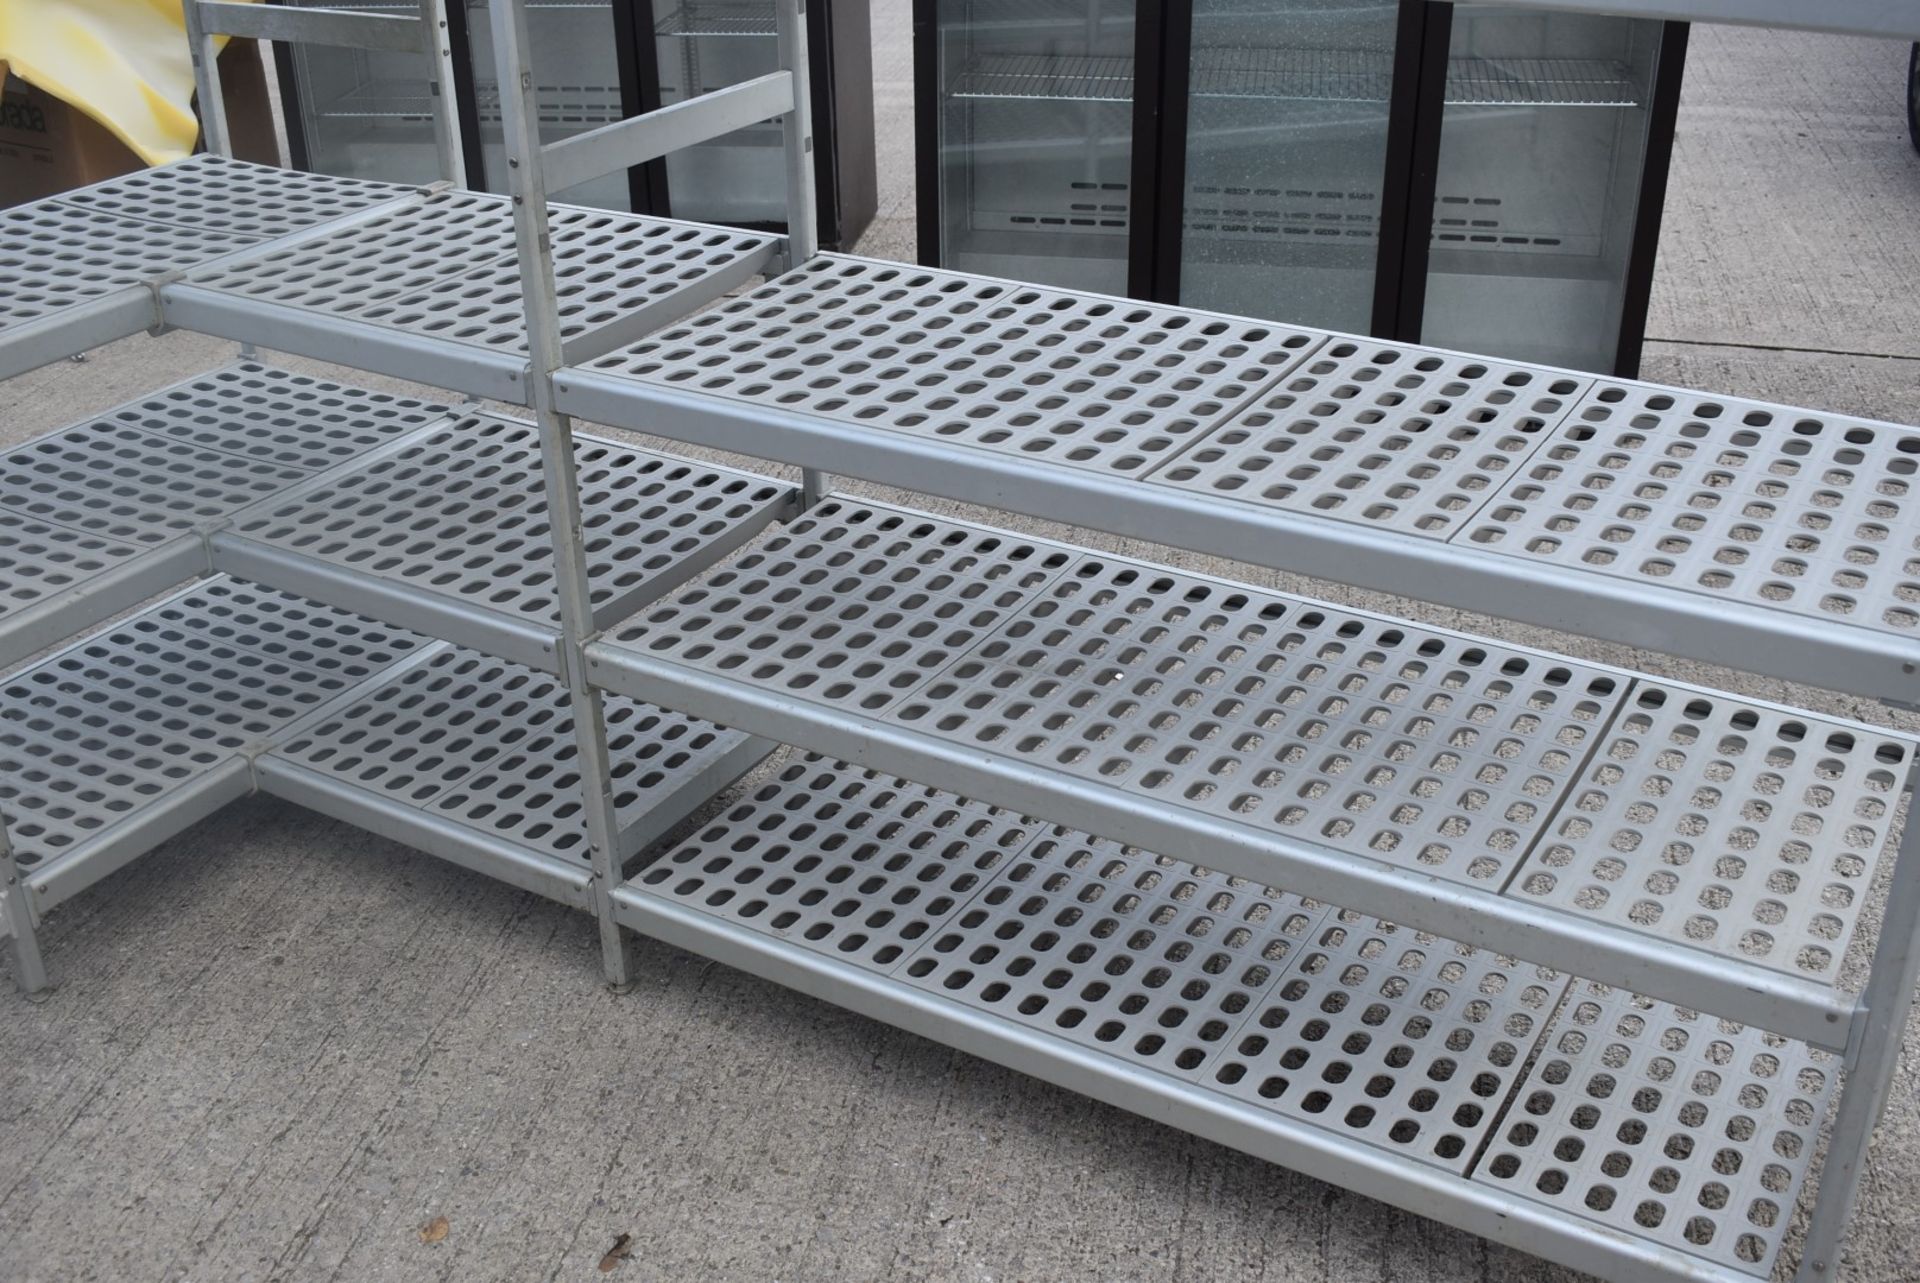 1 x Cold Room L Shaped Shelving Unit With Aluminium Frame and Perforated Shelf Panels - Image 8 of 8